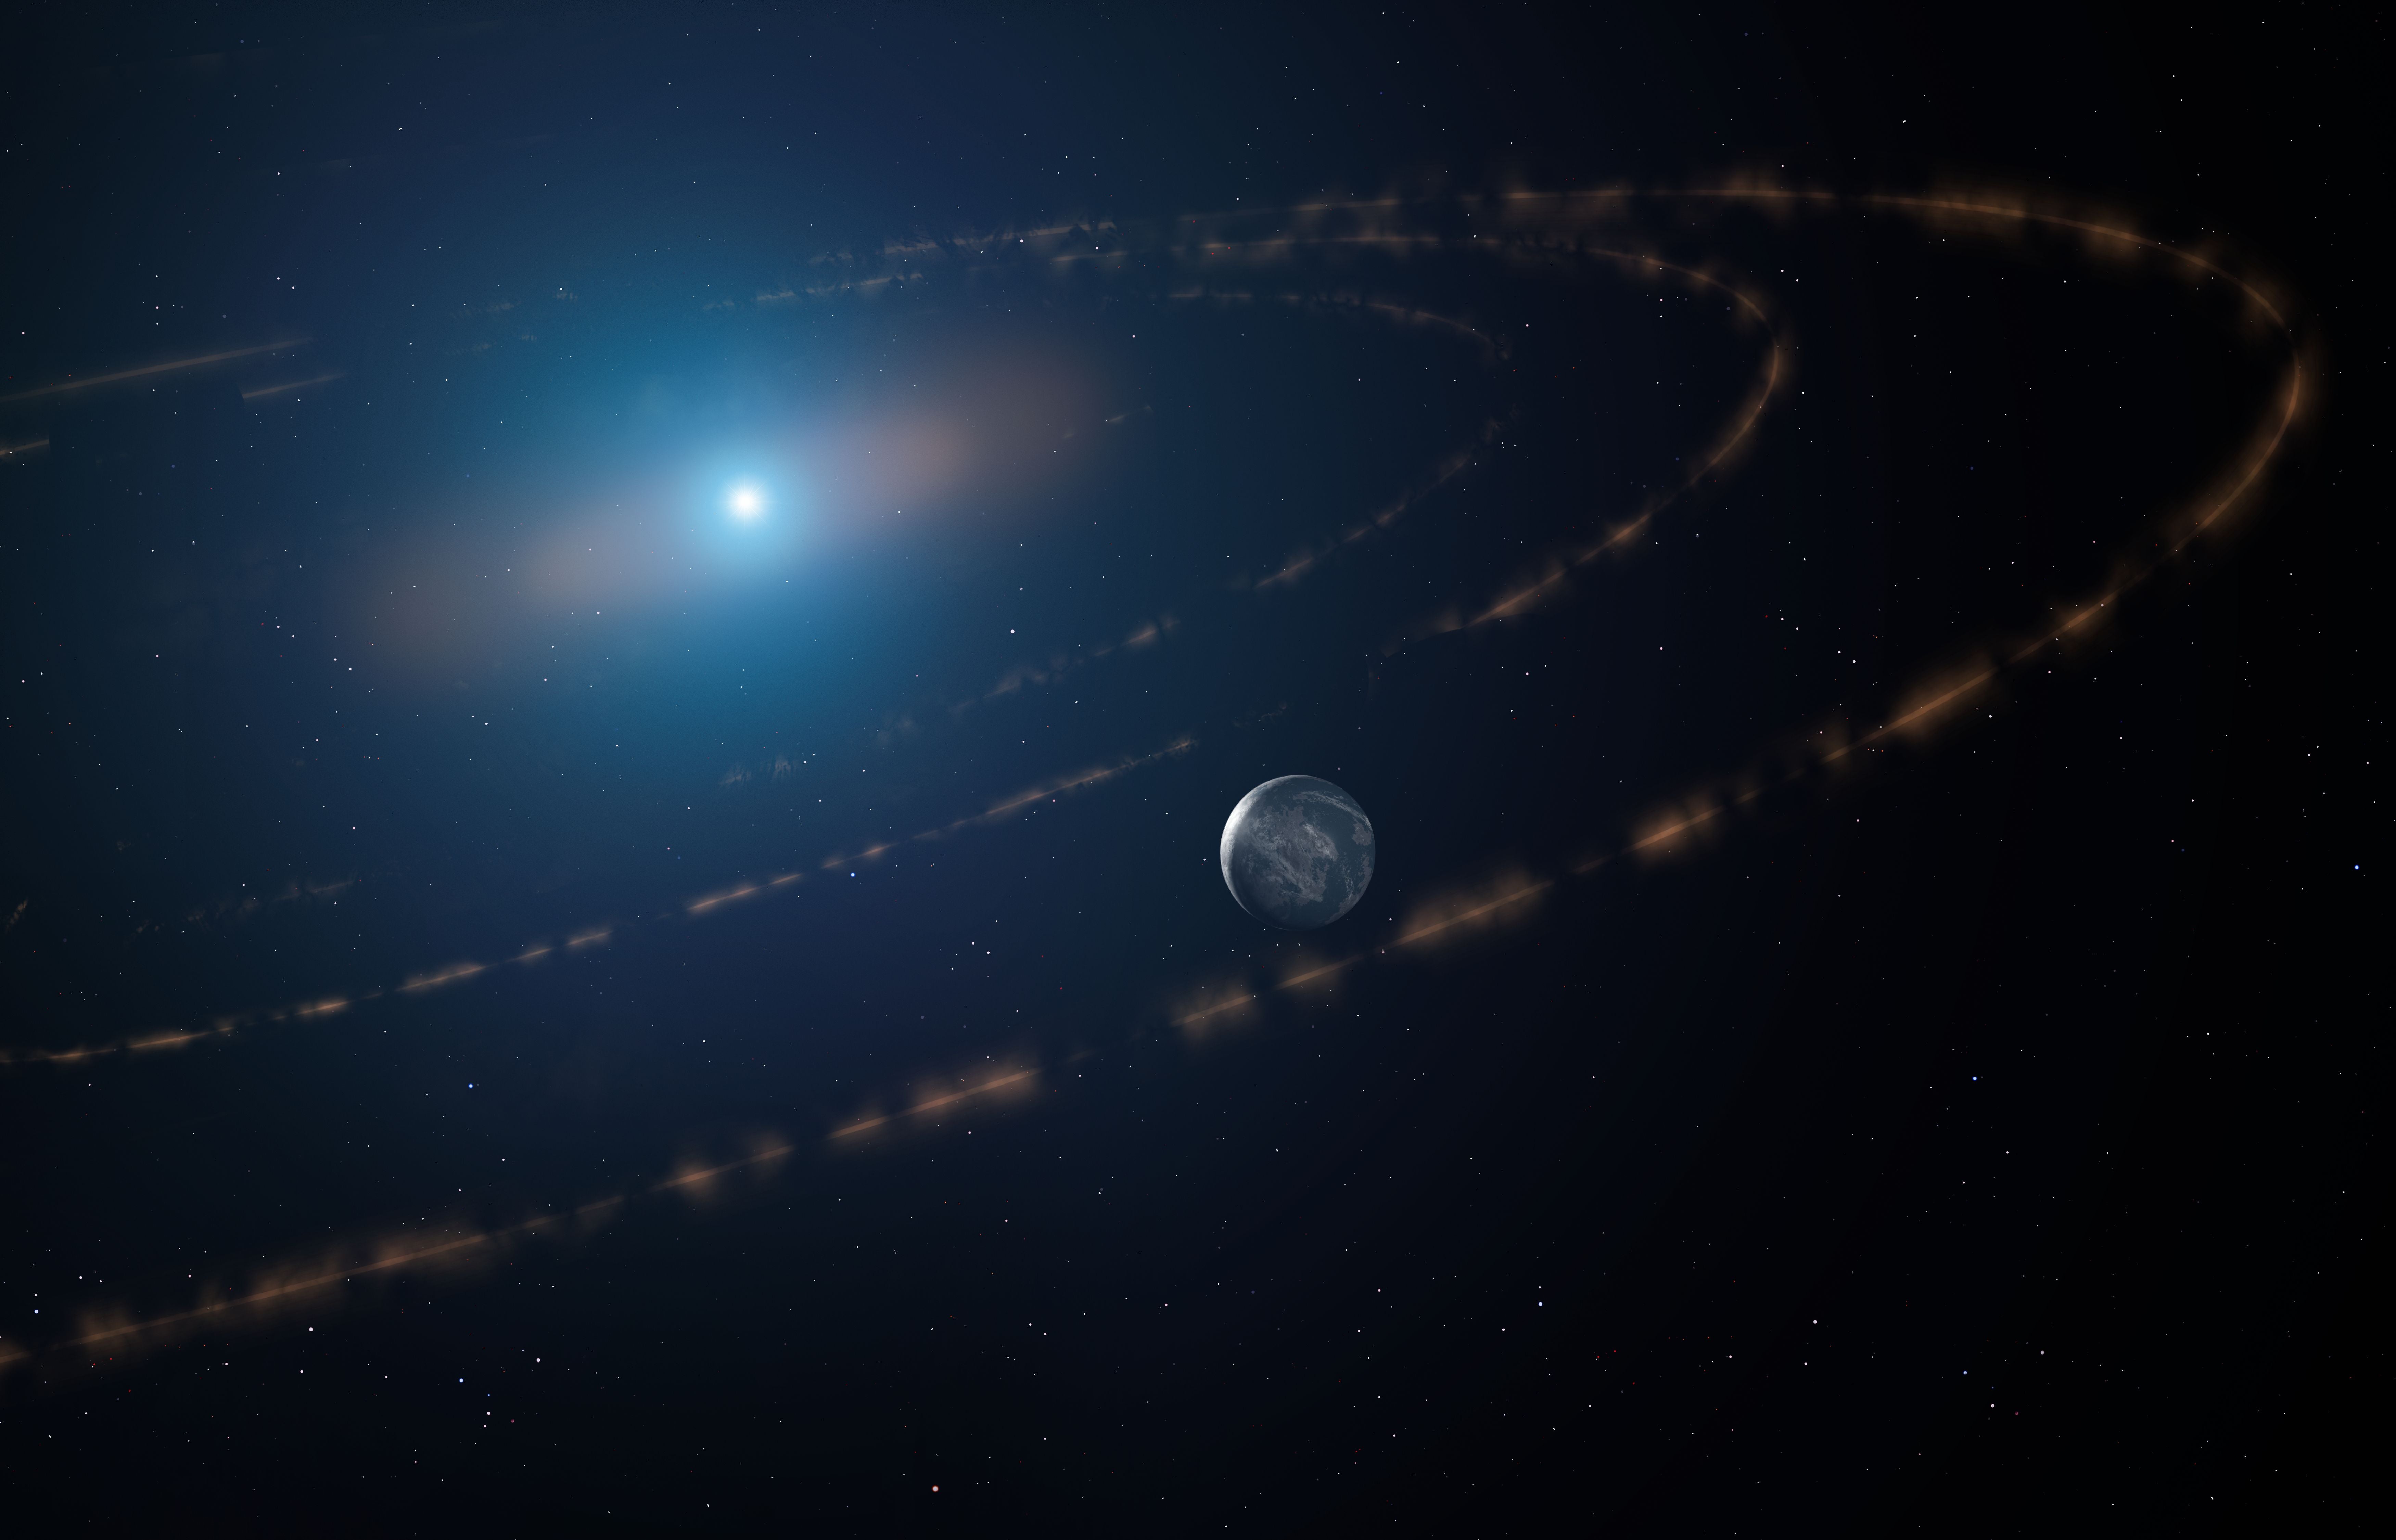 An artist’s impression of the white dwarf star WD1054–226 orbited by clouds of planetary debris and a major planet in the habitable zone (Mark Garlick markgarlick.com/PA)